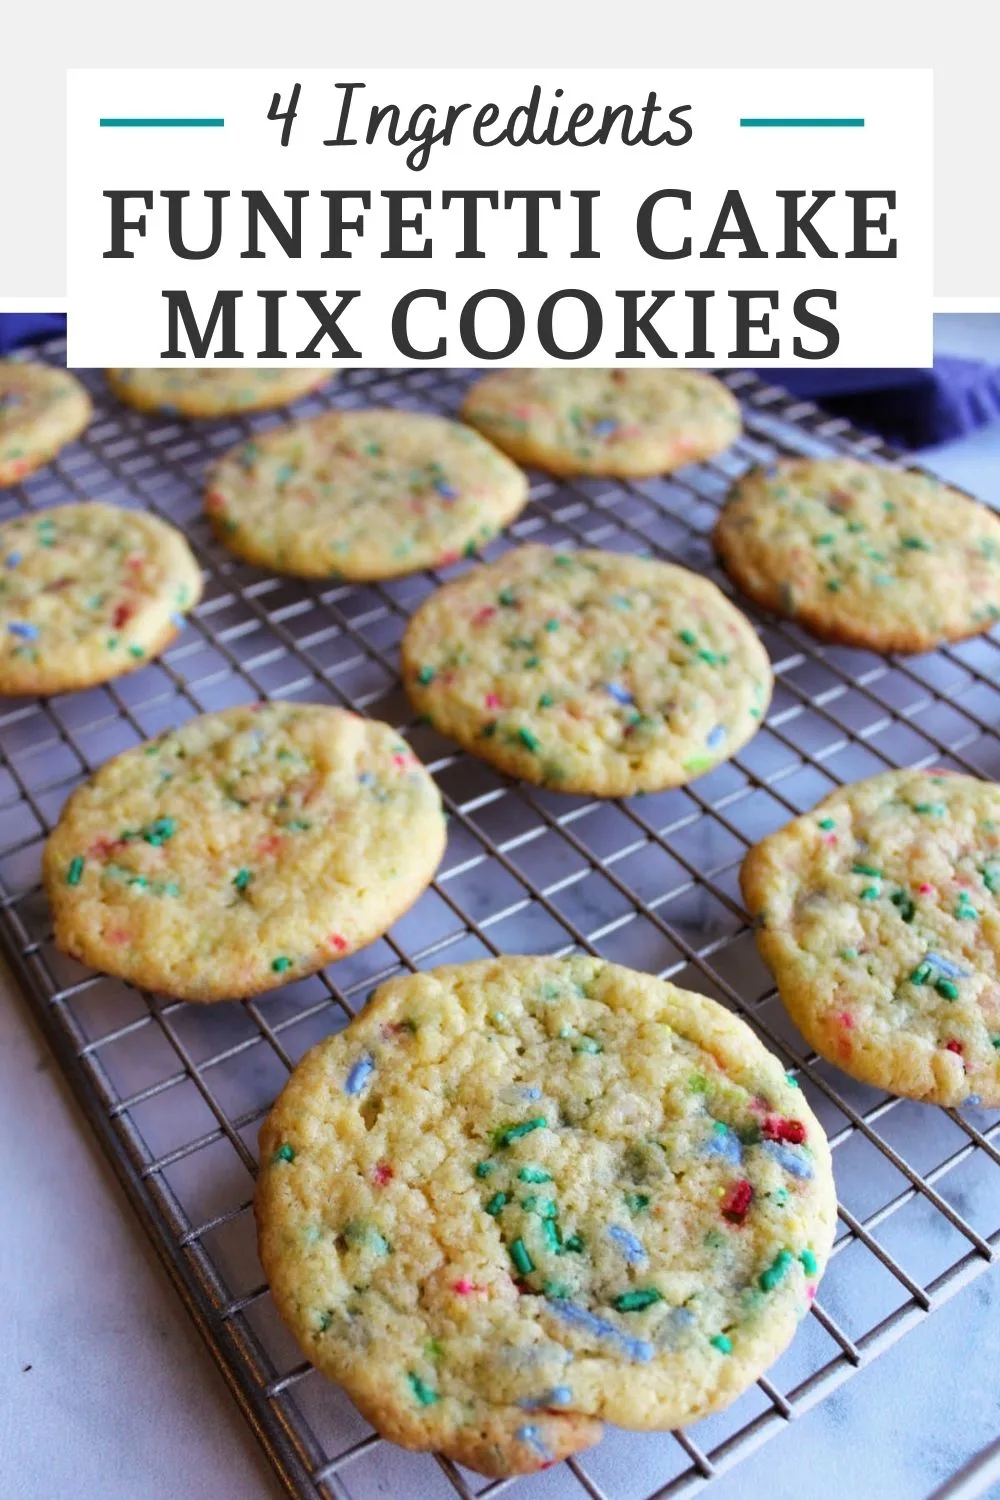 It only takes 3 or 4 of ingredients to make the soft and delicious funfetti cake mix cookies. Start with a box of cake mix and you'll have a sweet treat in just a matter of minutes!